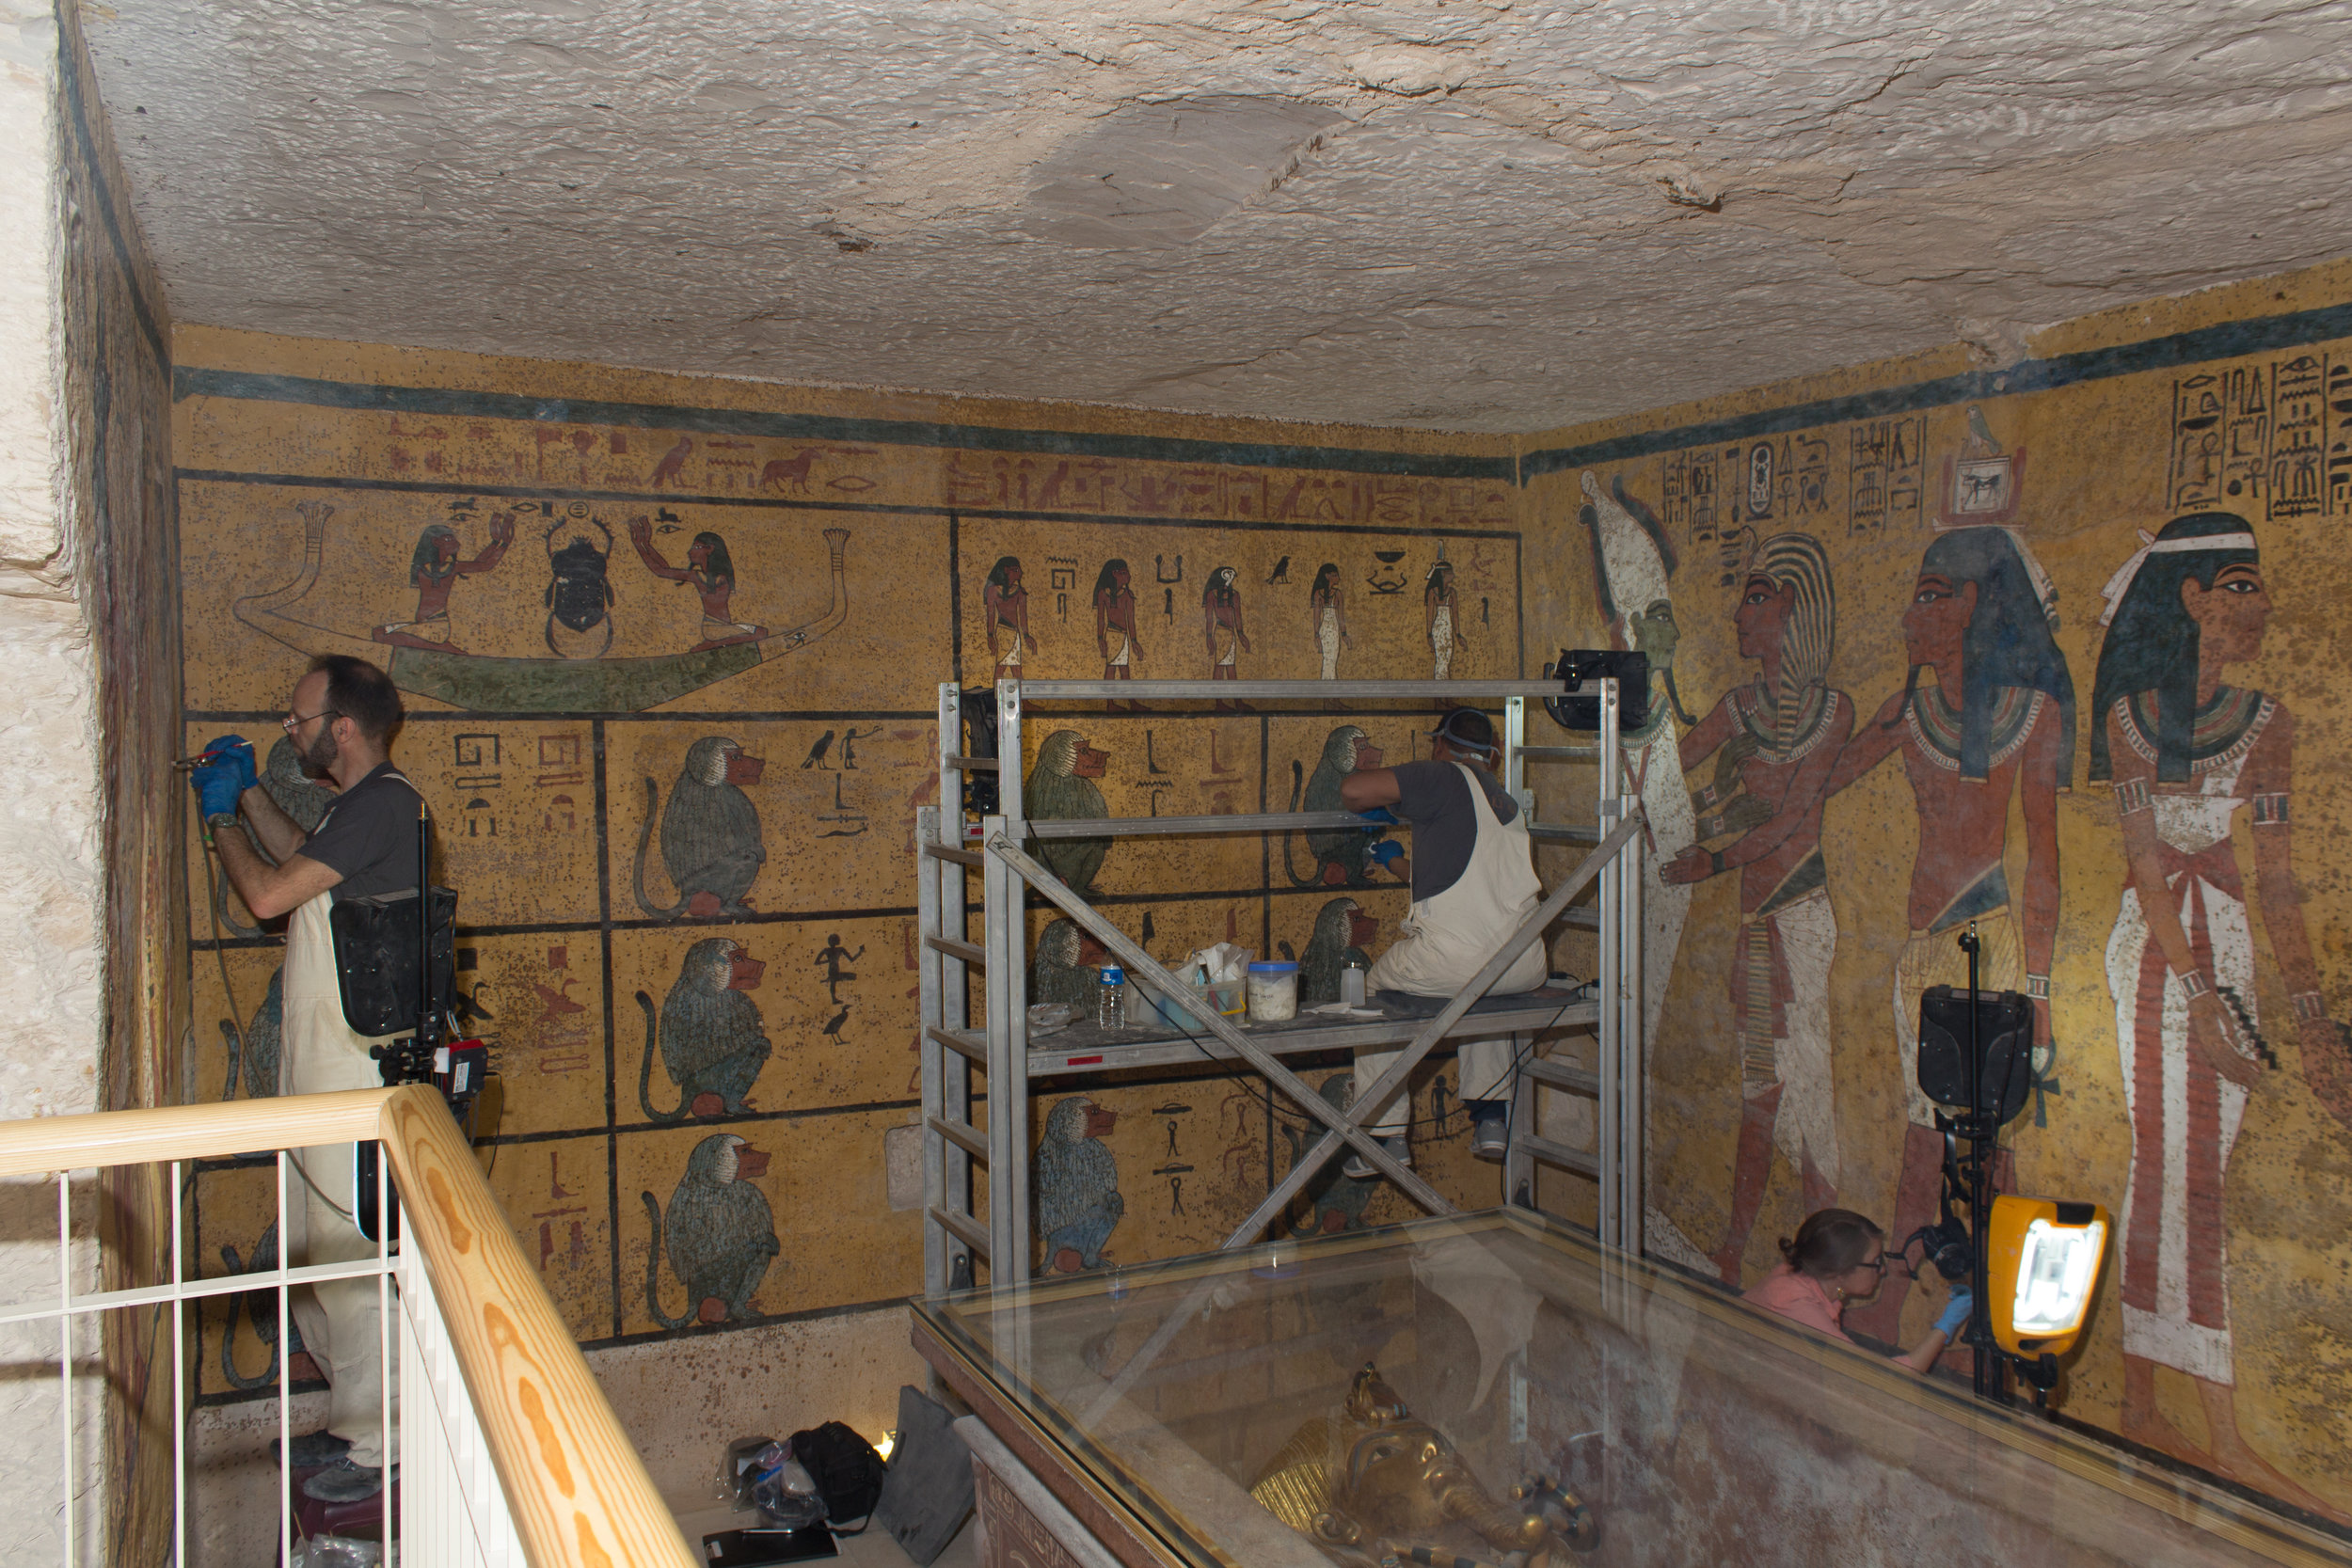  The team set up for conservation treatment of the wall paintings.  Image © J. Paul Getty Trust, 2016 